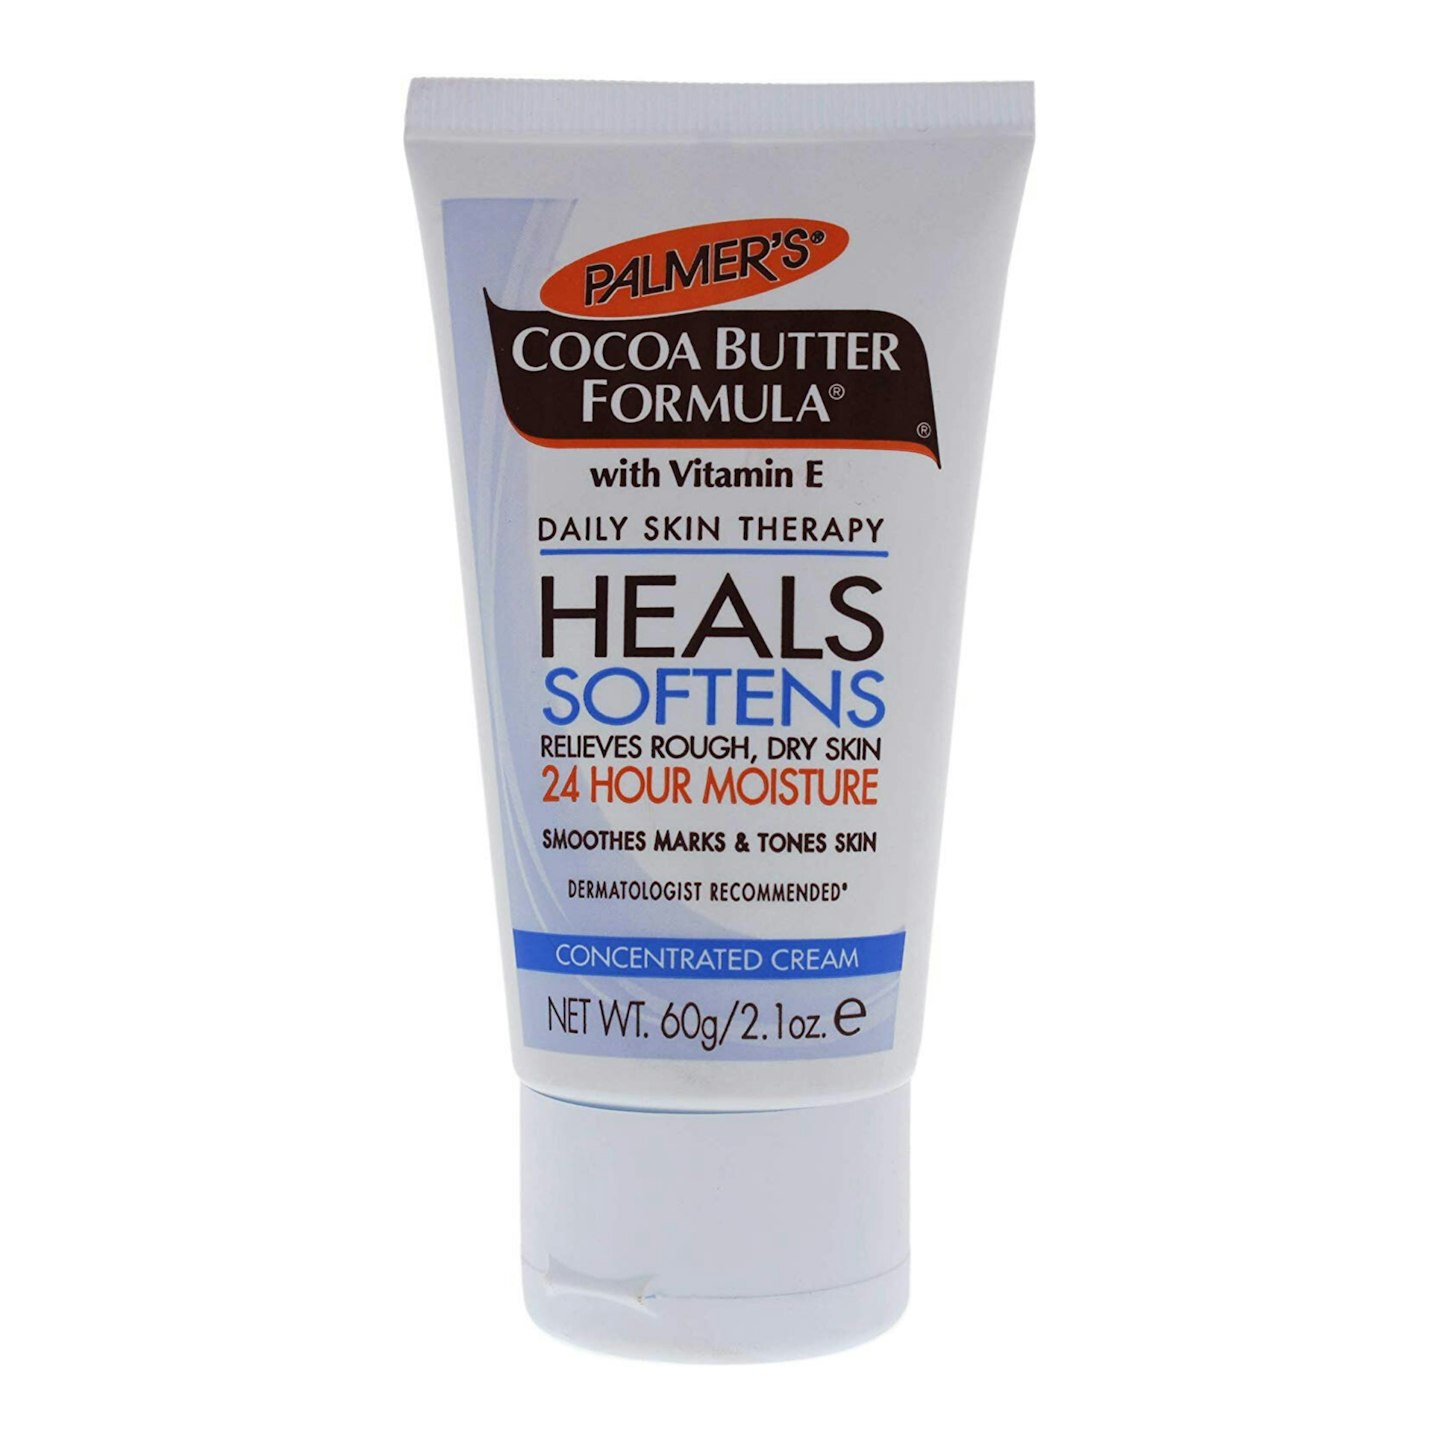 Palmers Cocoa Butter Concentrated Cream Tube